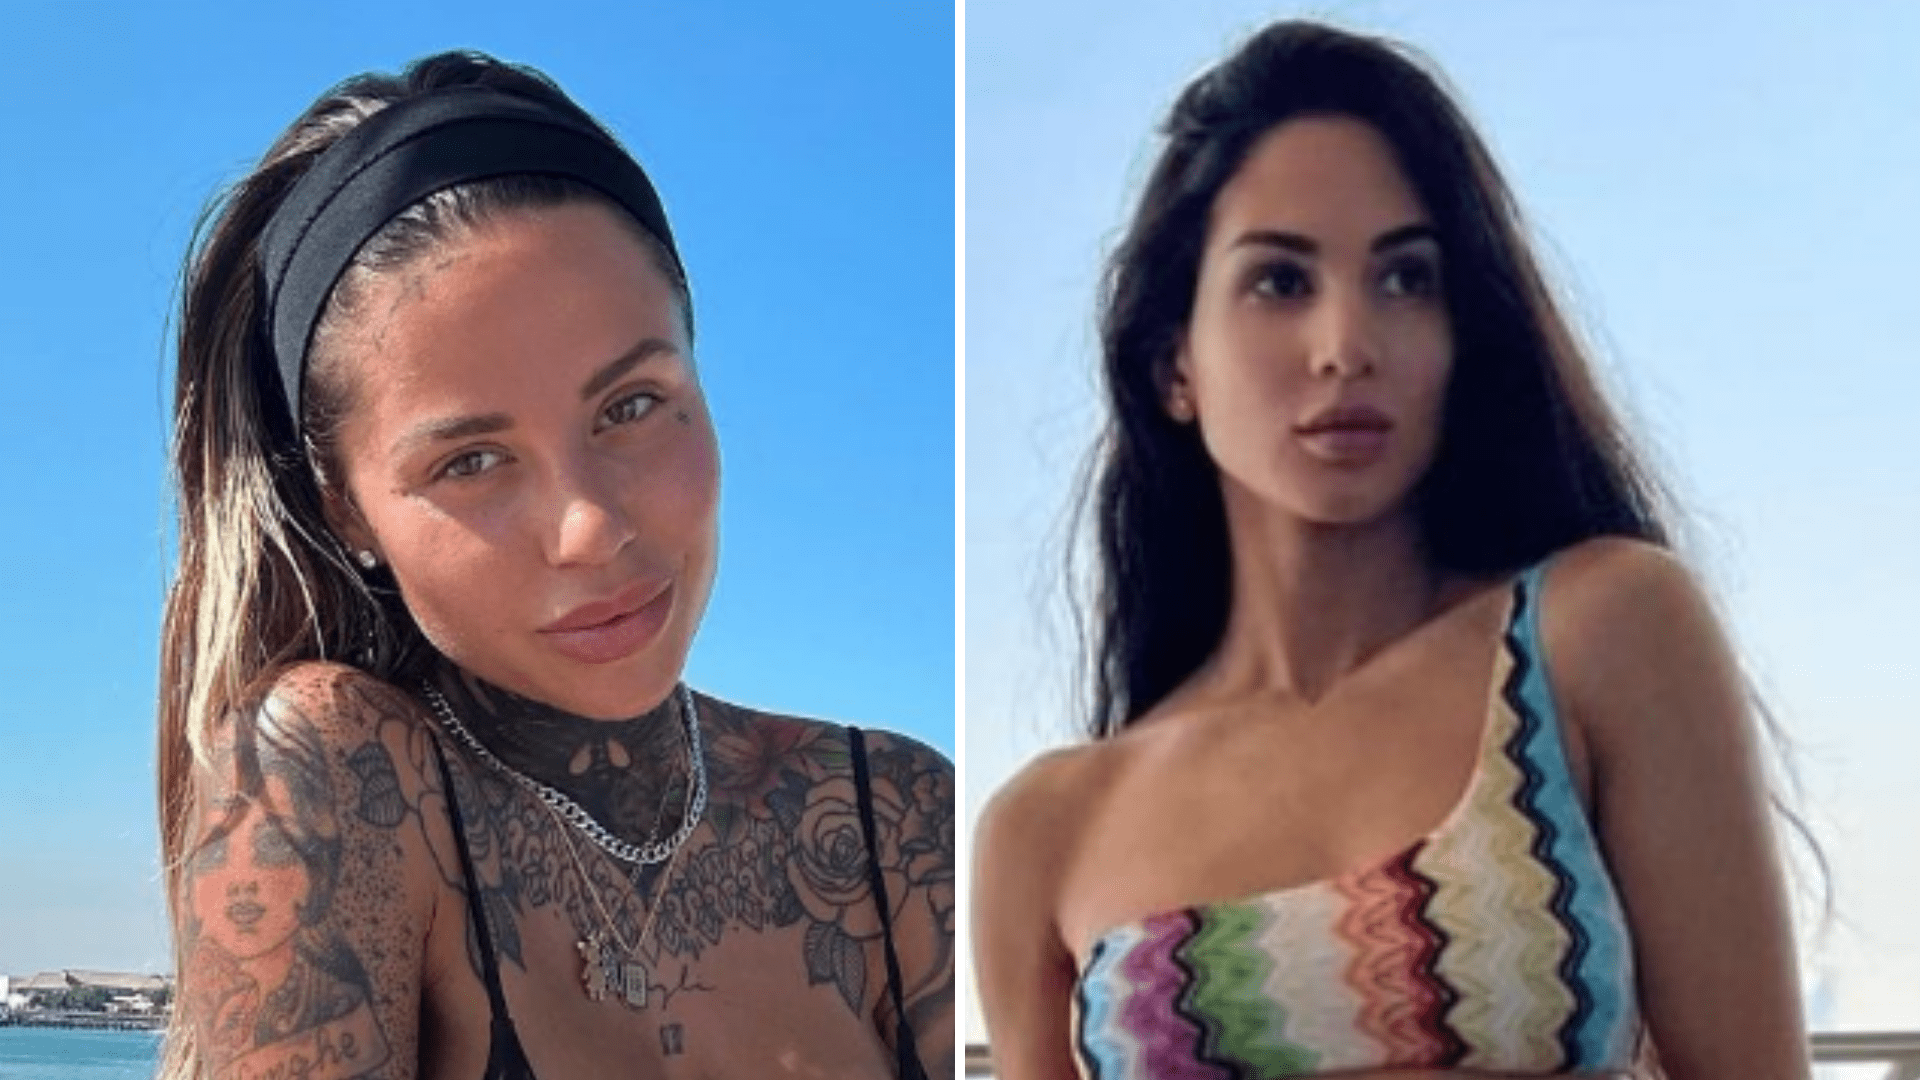 Meet France's stunning Wags, including fitness instructor and tattoo artist, with 1 million followers